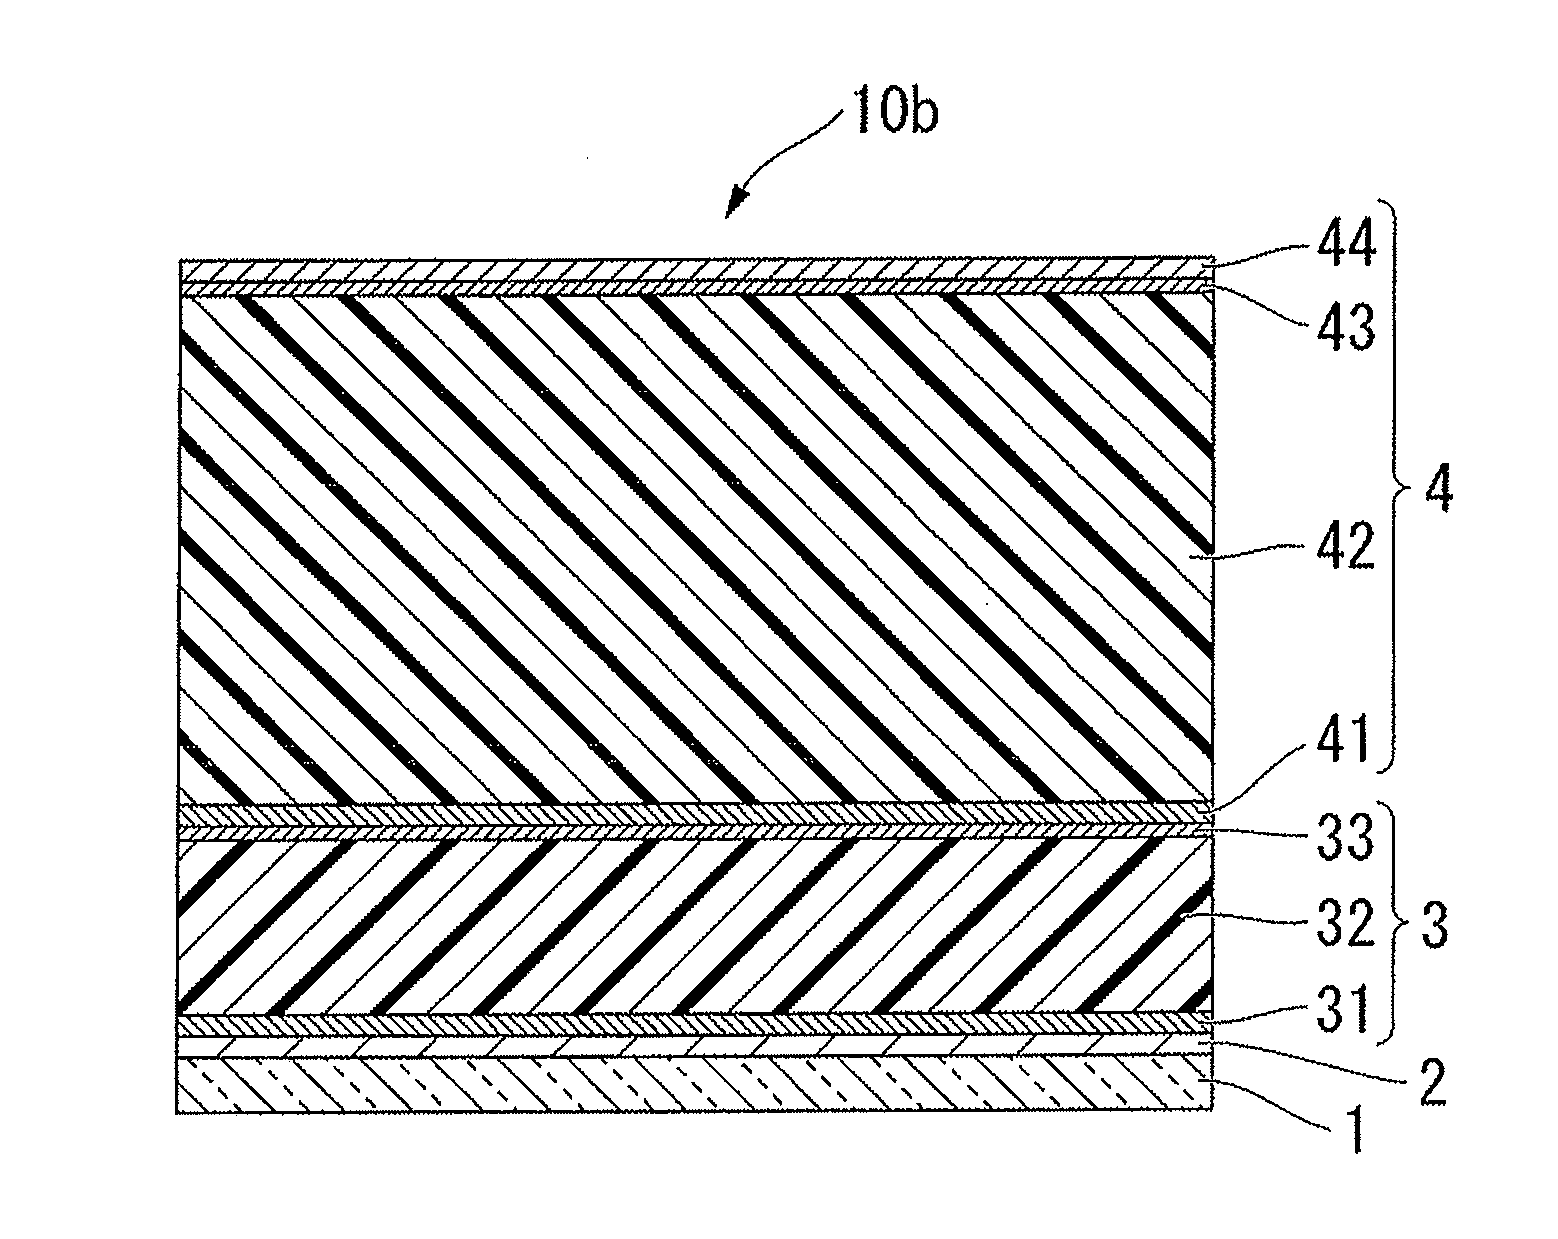 Photoelectric conversion device manufacturing method, photoelectric conversion device, photoelectric conversion device manufacturing system, and method for using photoelectric conversion device manufacturing system